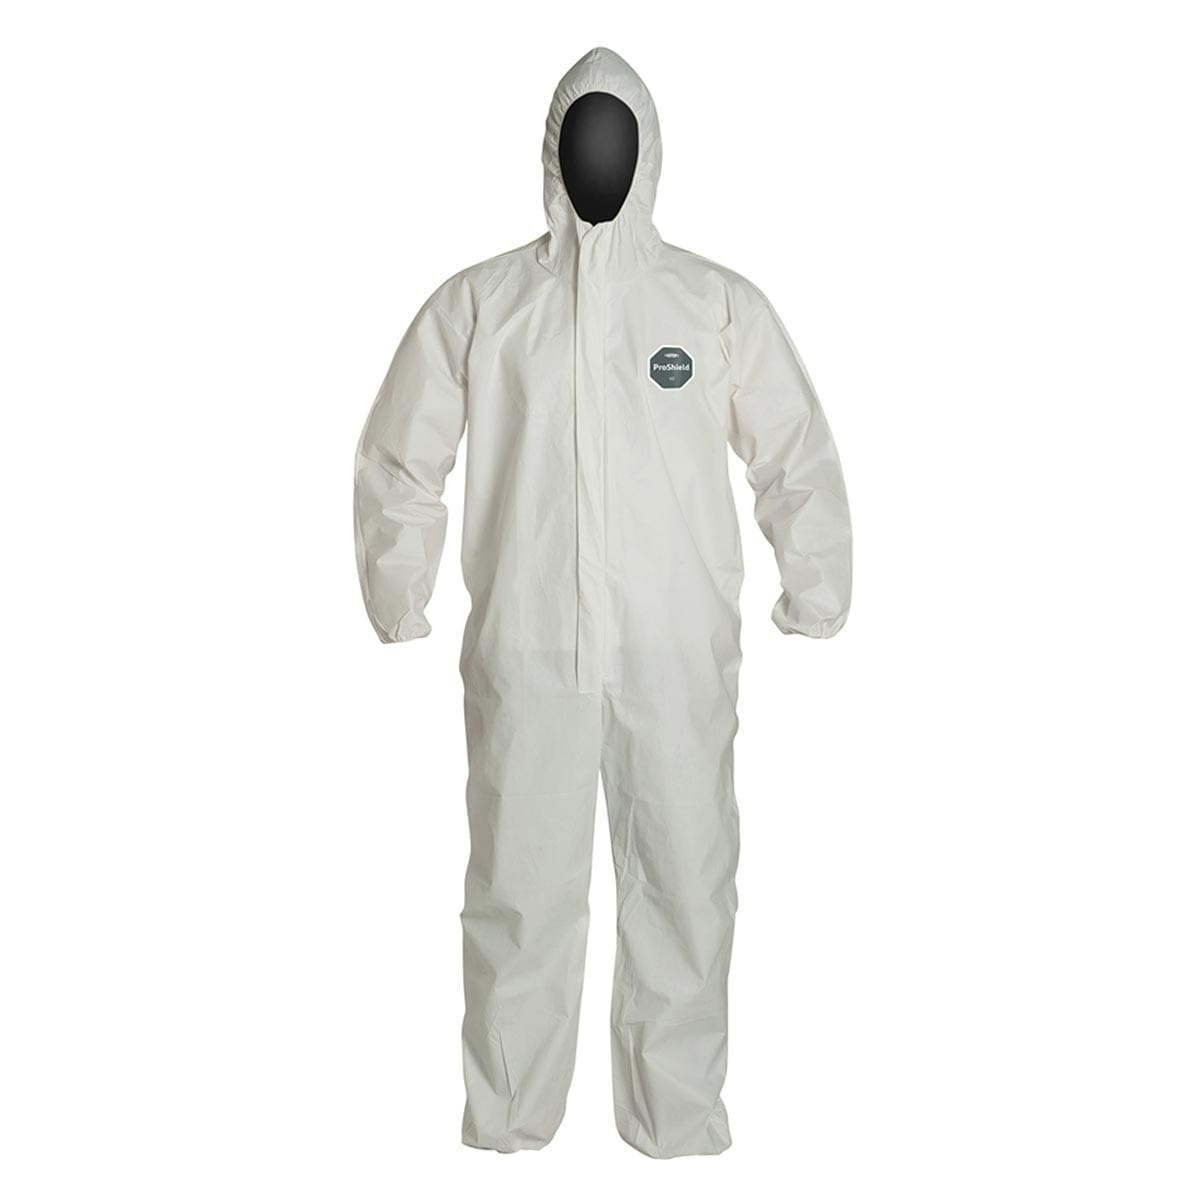 DuPont ProShield 60 Coveralls with Elastic Wrists and Ankles, 25pk